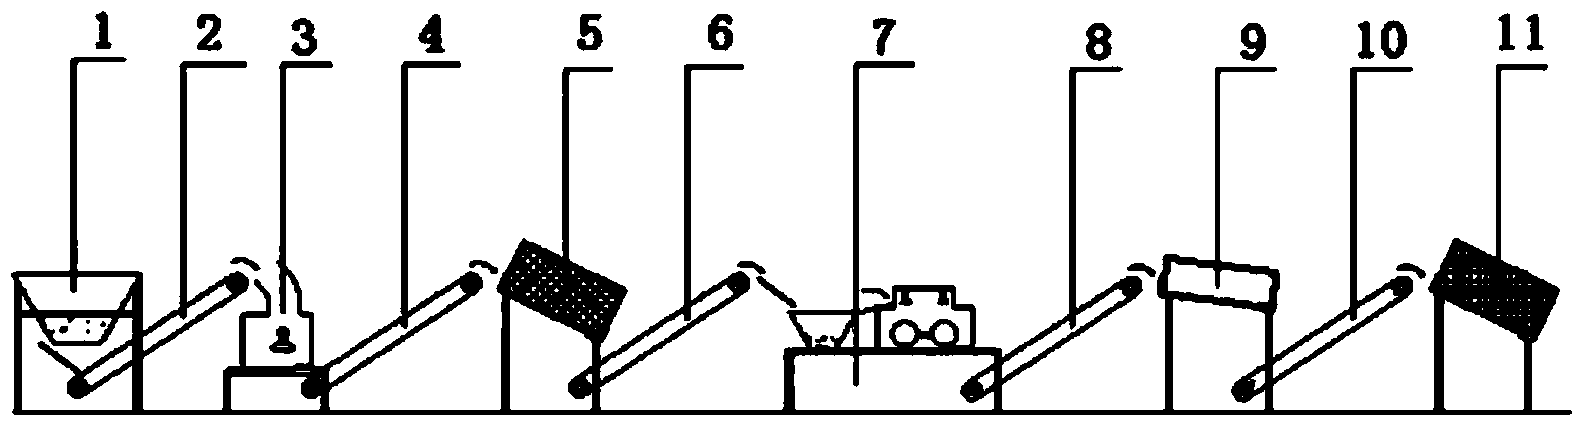 Production system of burying matter for pet feces